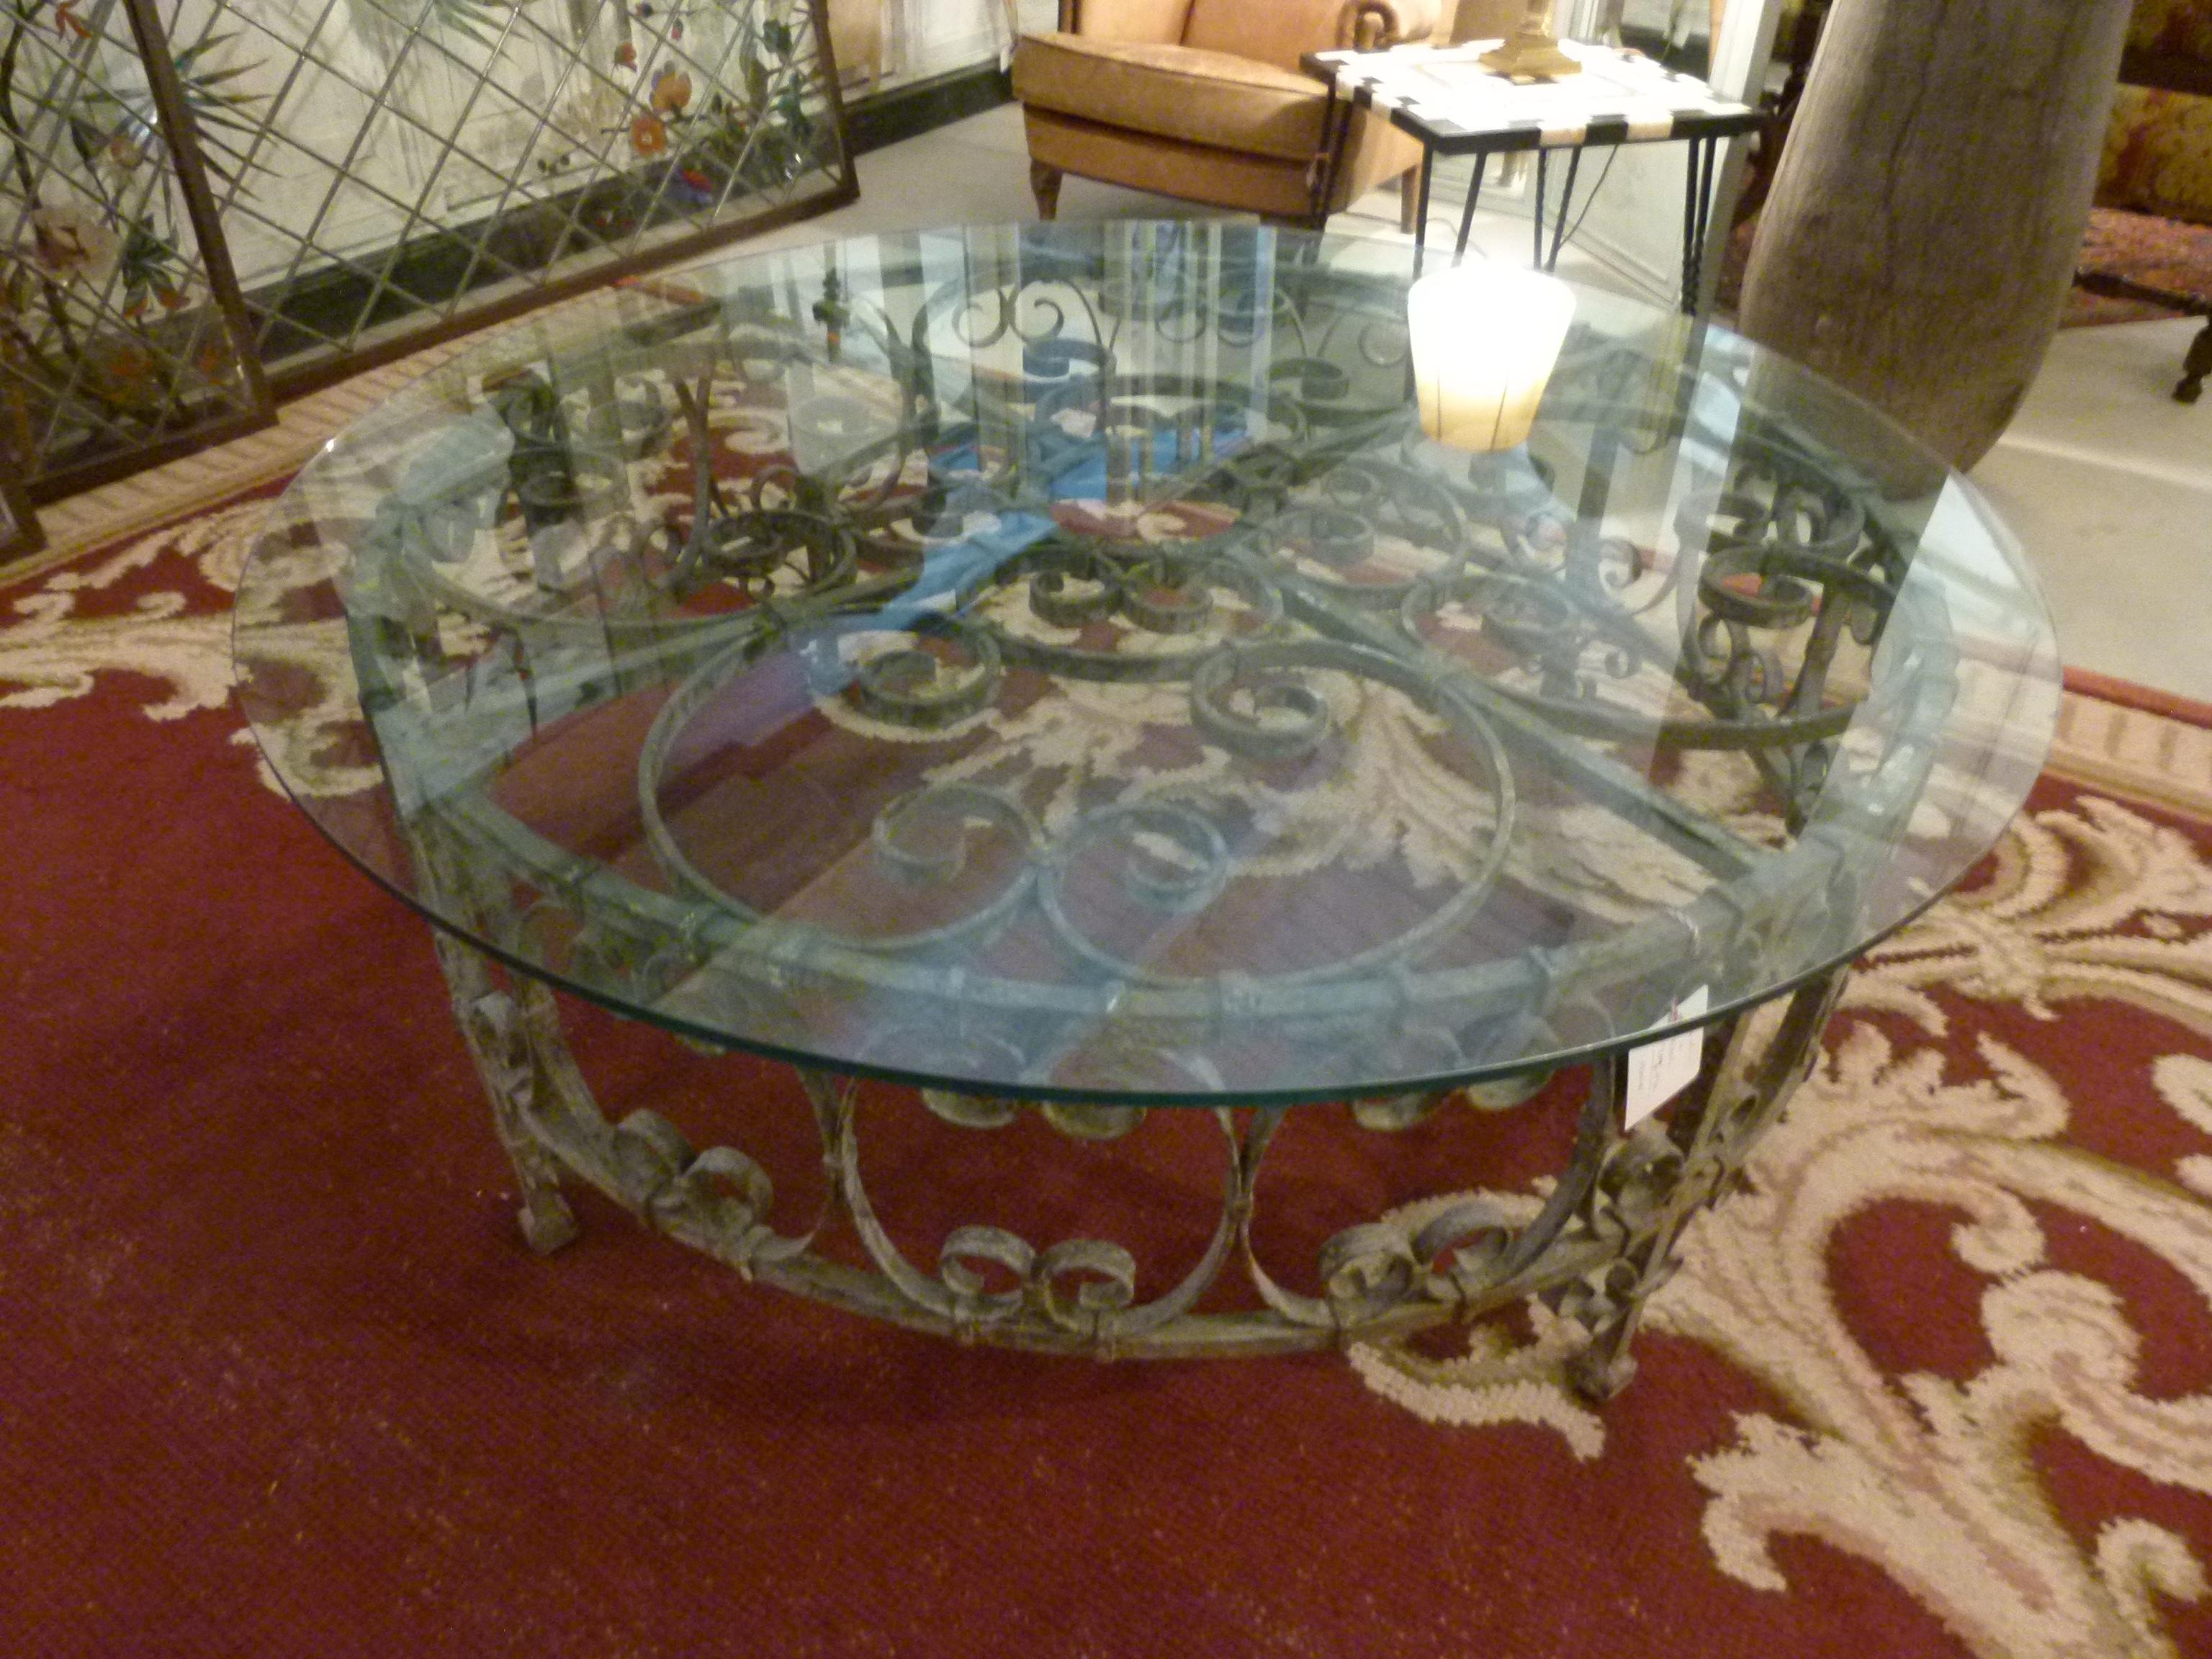 Round  coffee table with a mixture of old and new.  A 18th century iron base with a rounded glass on the top. 
The transparency of the glass allows to see the nice old piece below. A combination of antique and modern that creates balance and